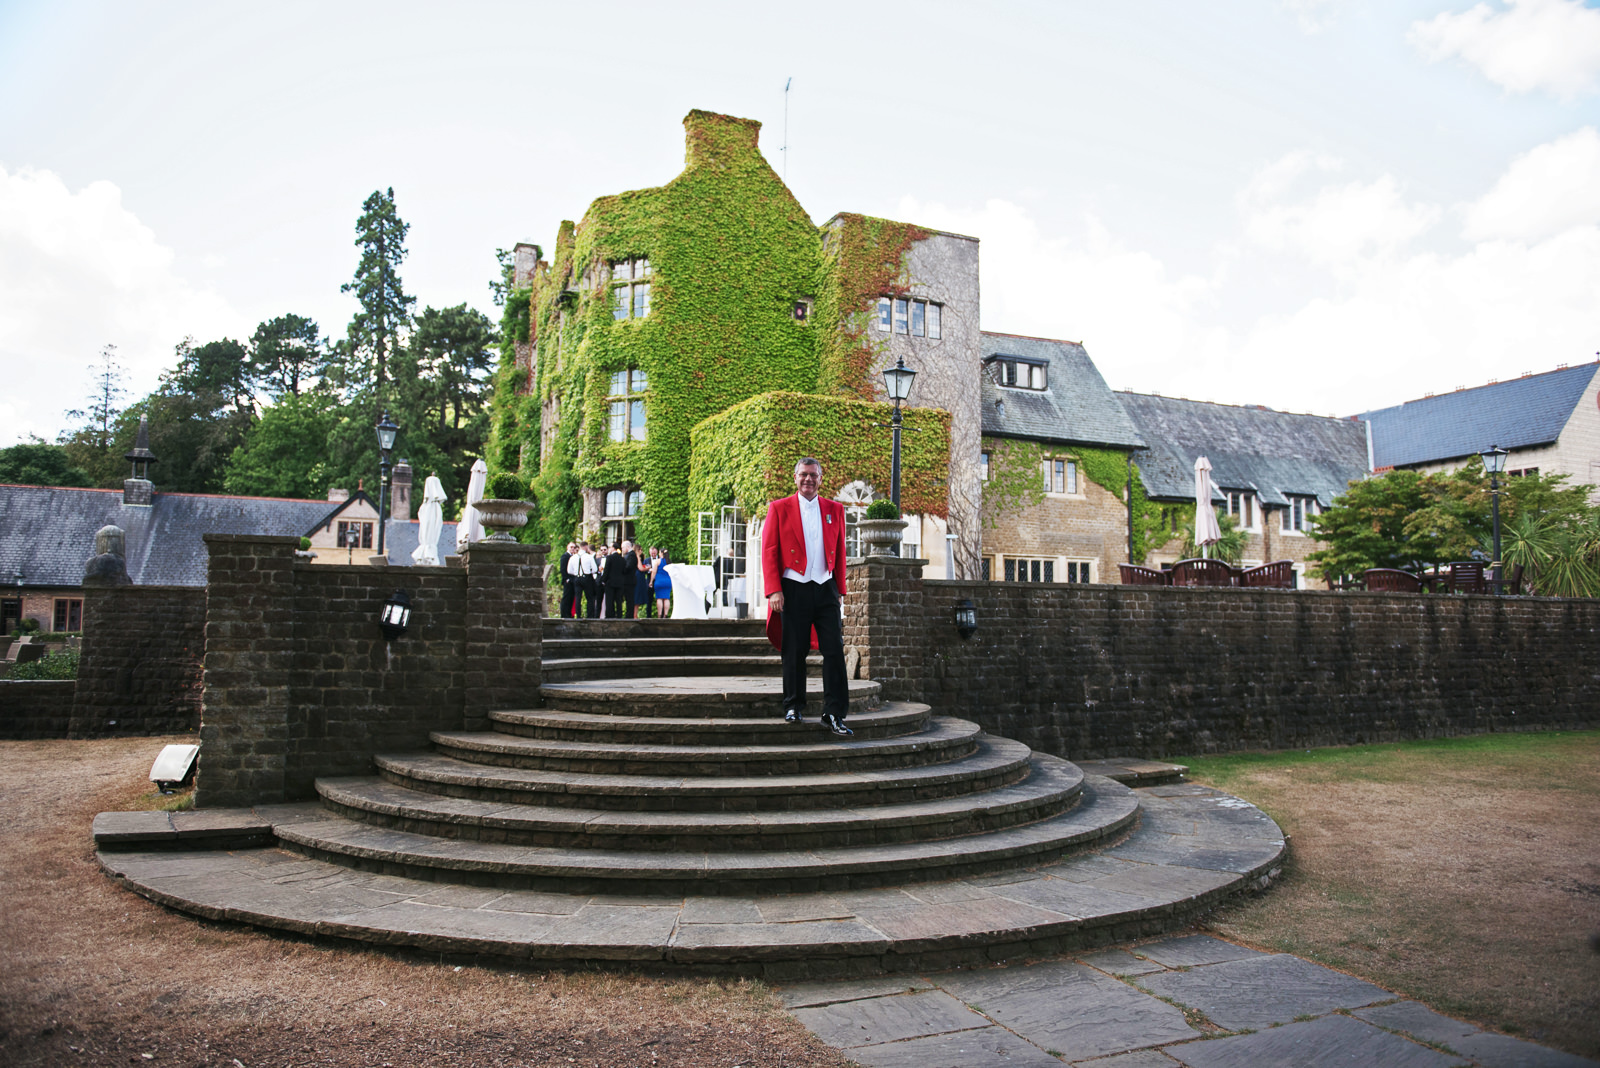 Toastmasters at Pennyhill park